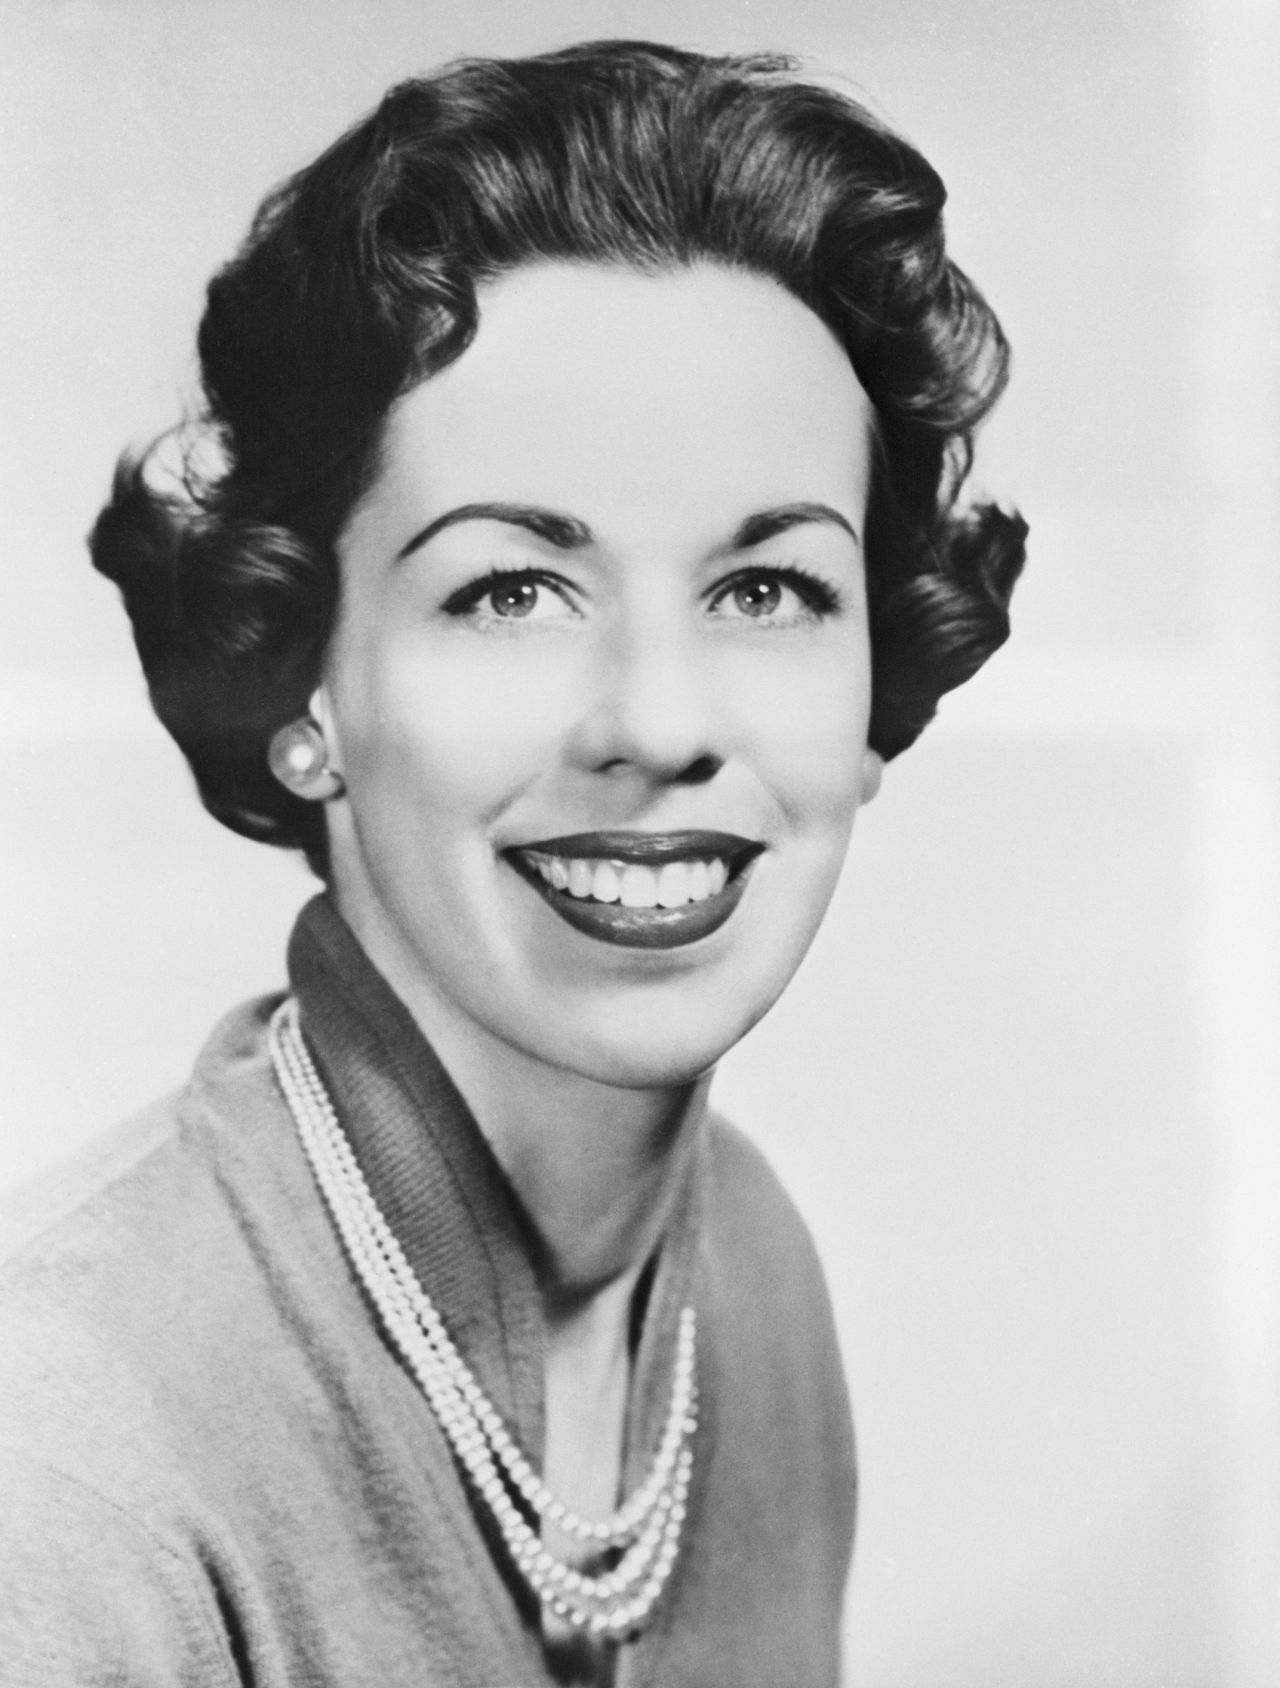 A young Burnett is seen in an undated portrait. Burnett was born in San Antonio in 1933, and she later moved to Los Angeles, where she attended UCLA and took theater-arts classes.